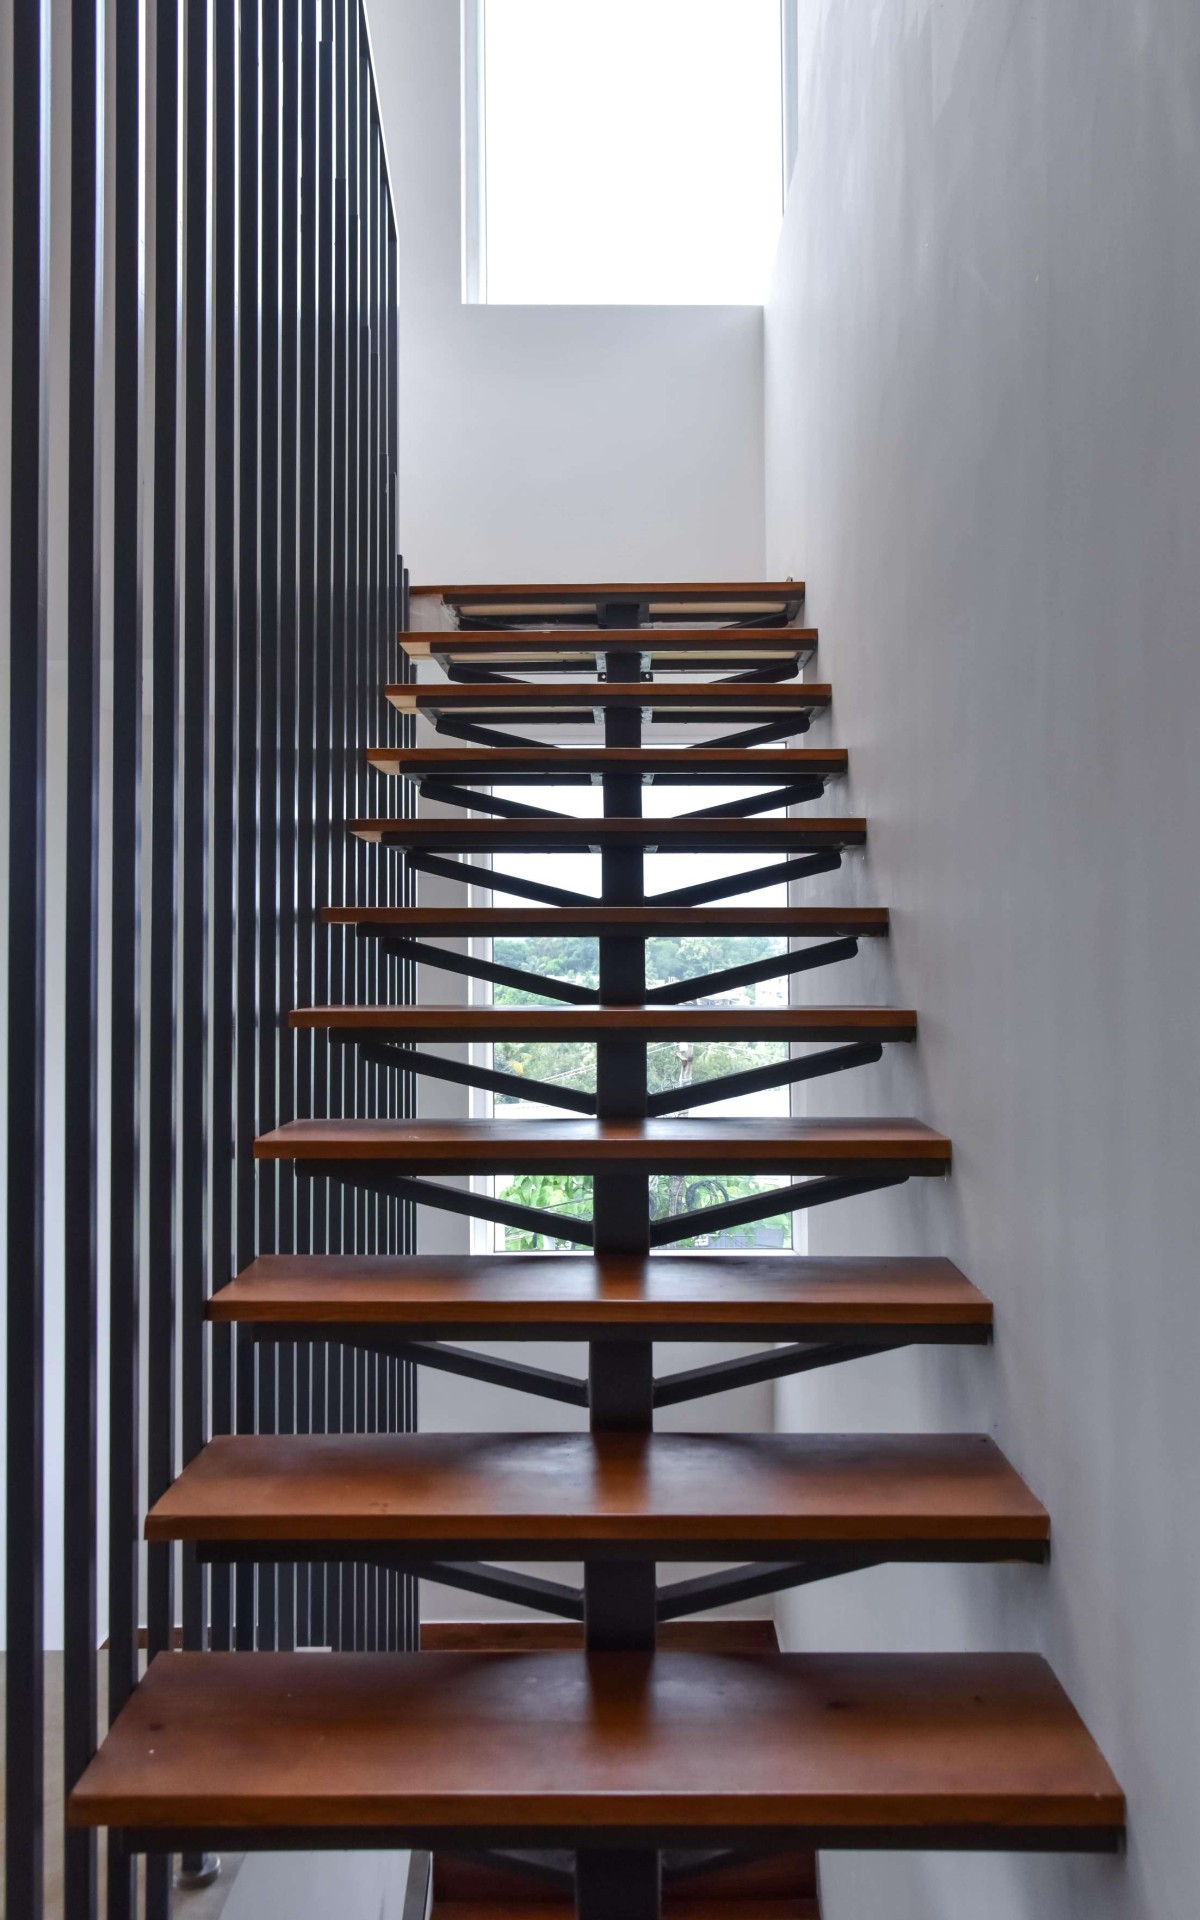 Staircase of The N’Arrow House by Designloom Architects